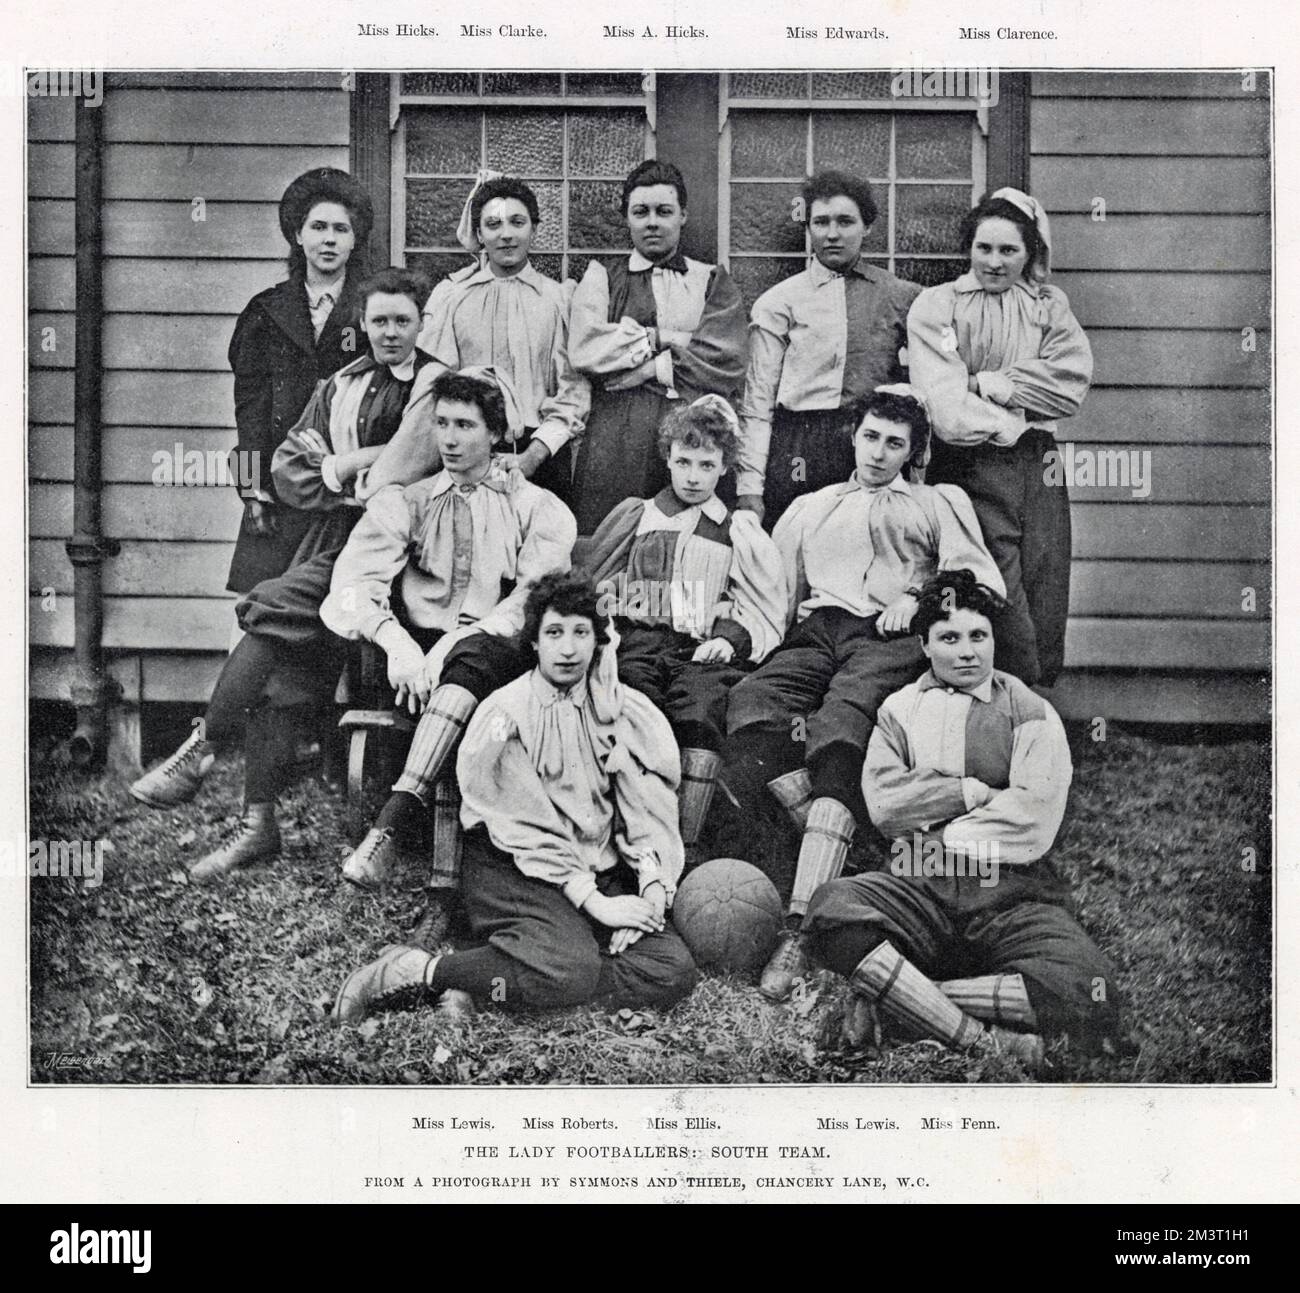 The determined-looking ladies of the 'South' football team who played the 'North' team at the in the opening match of the British Ladies' Football Club at Nightingale Lane ground at Crouch End in March 1895. The Sketch magazine was not terribly positive about their abilities and claimed the ten thousand spectators were only there to satisfy their curiosity. Stock Photo